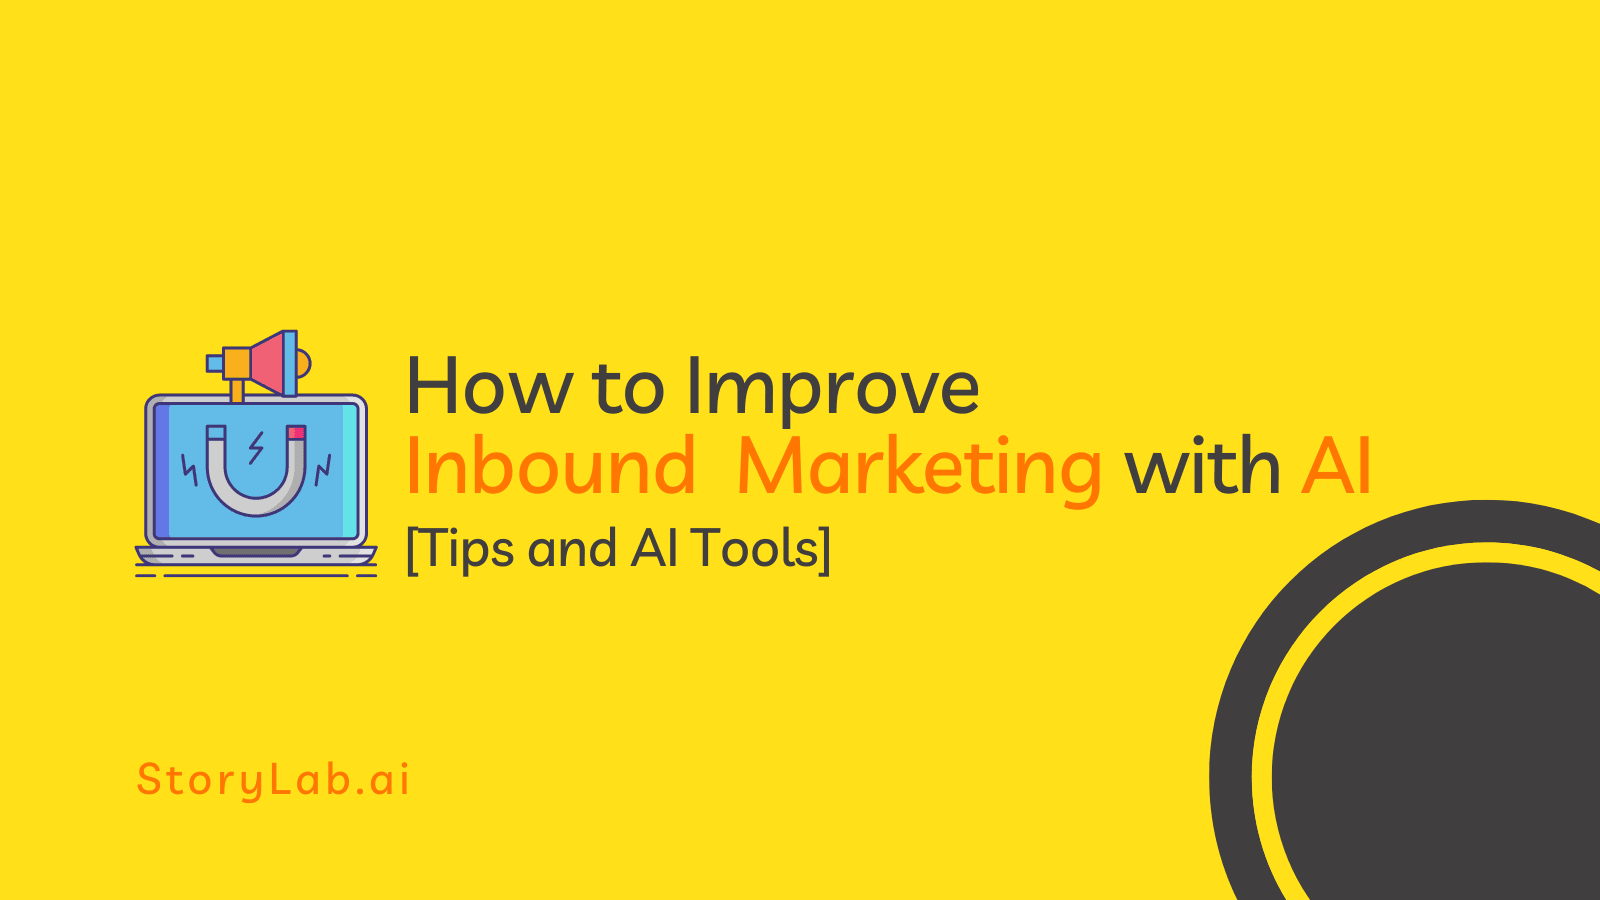 How to Improve Inbound Marketing with AI Tips and AI Tools